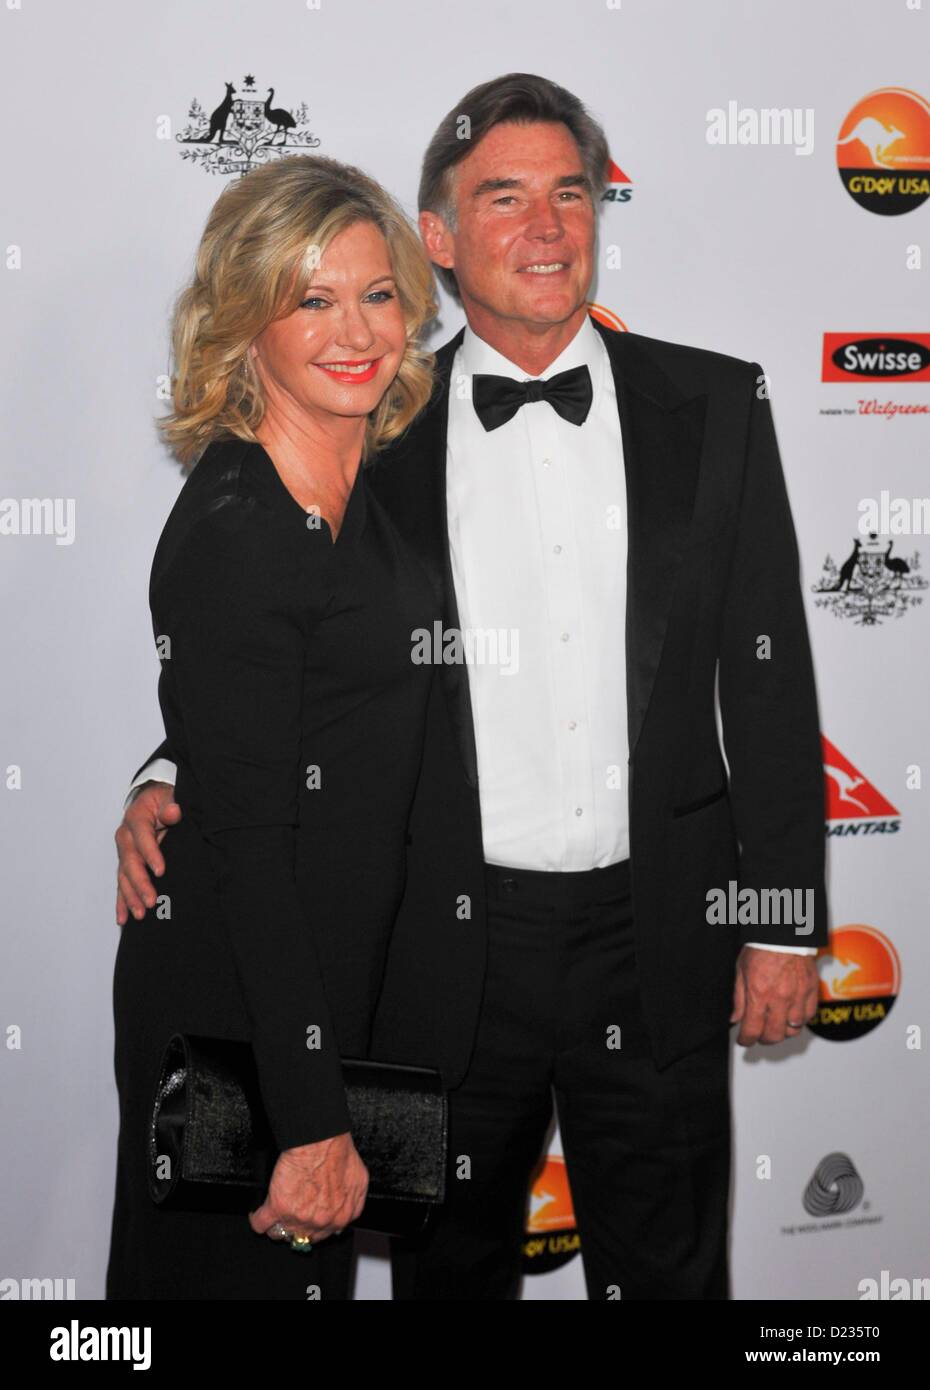 Olivia Newton John,  John Easterling at arrivals for G'Day USA Gala, JW Marriot at LA Live, Los Angeles, CA January 12, 2013. Photo By: Elizabeth Goodenough/Everett Collection Stock Photo